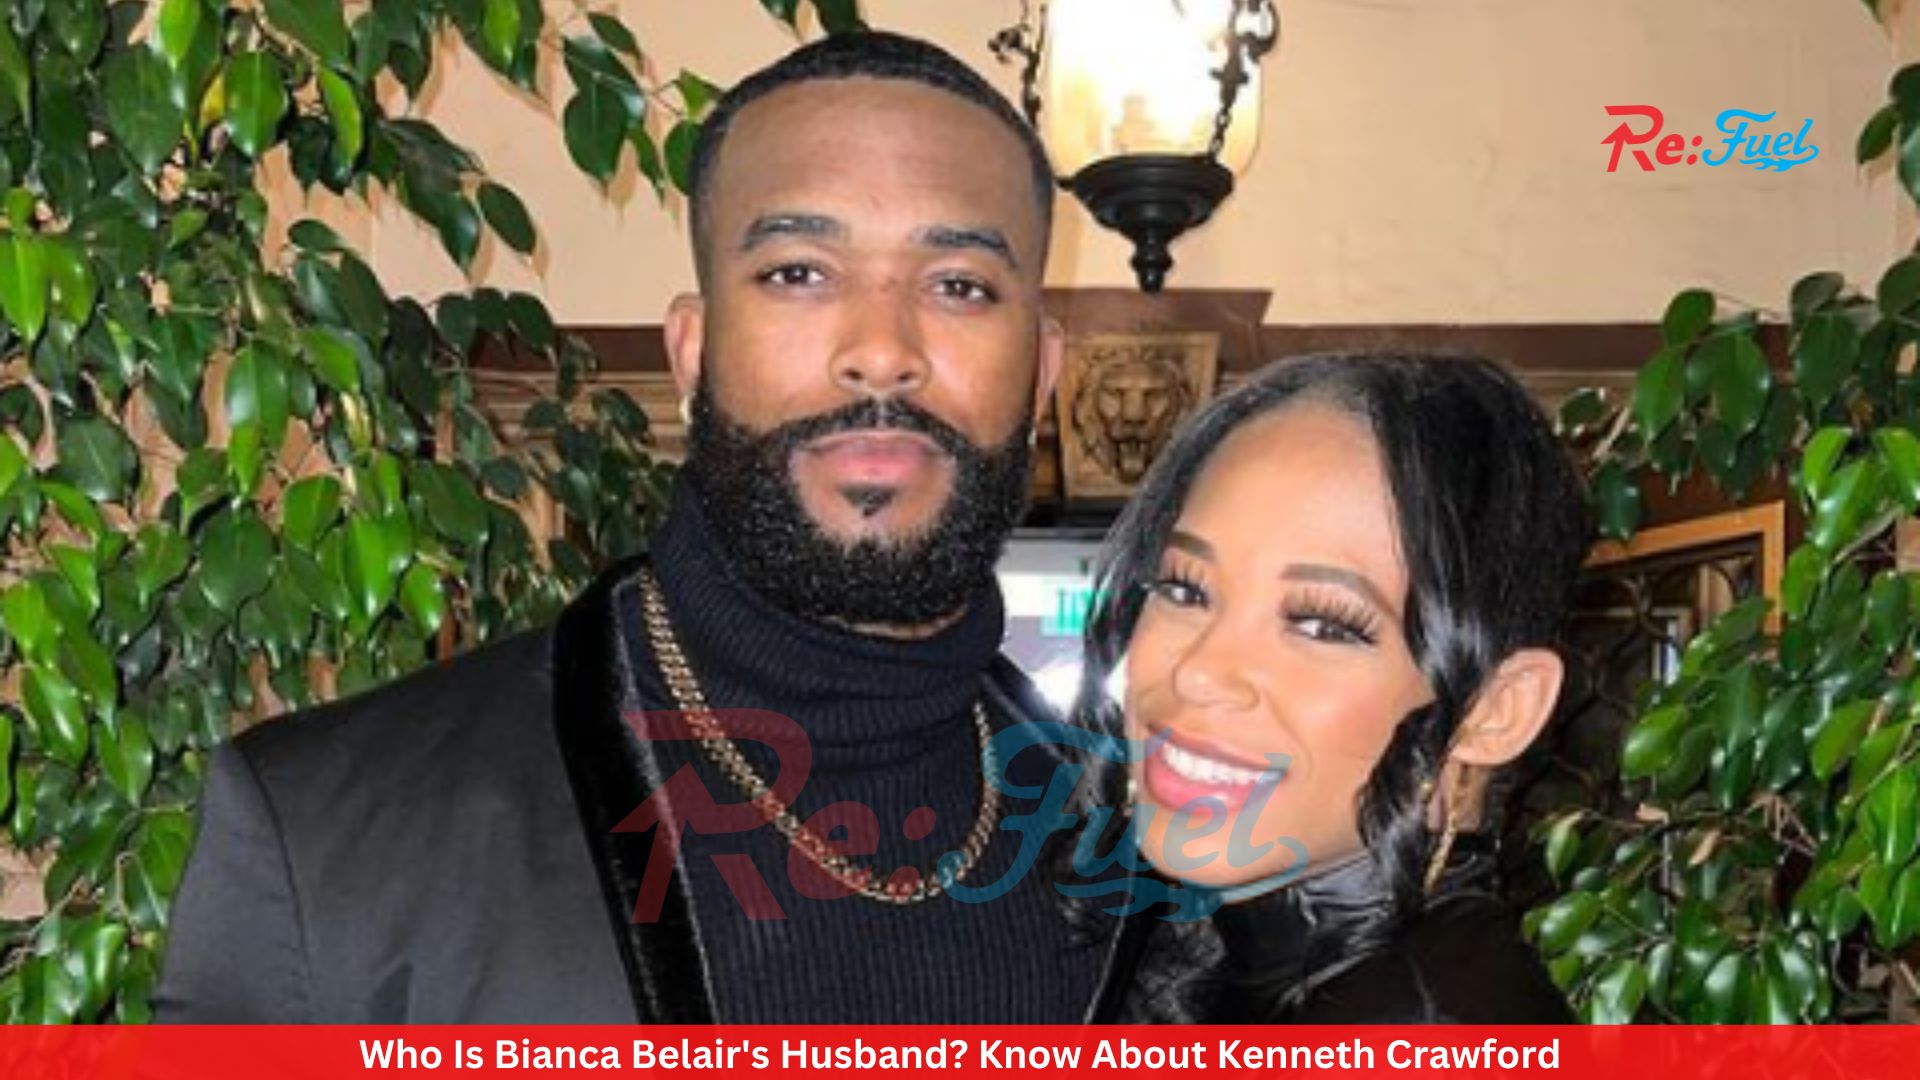 Who Is Bianca Belair's Husband? Know About Kenneth Crawford